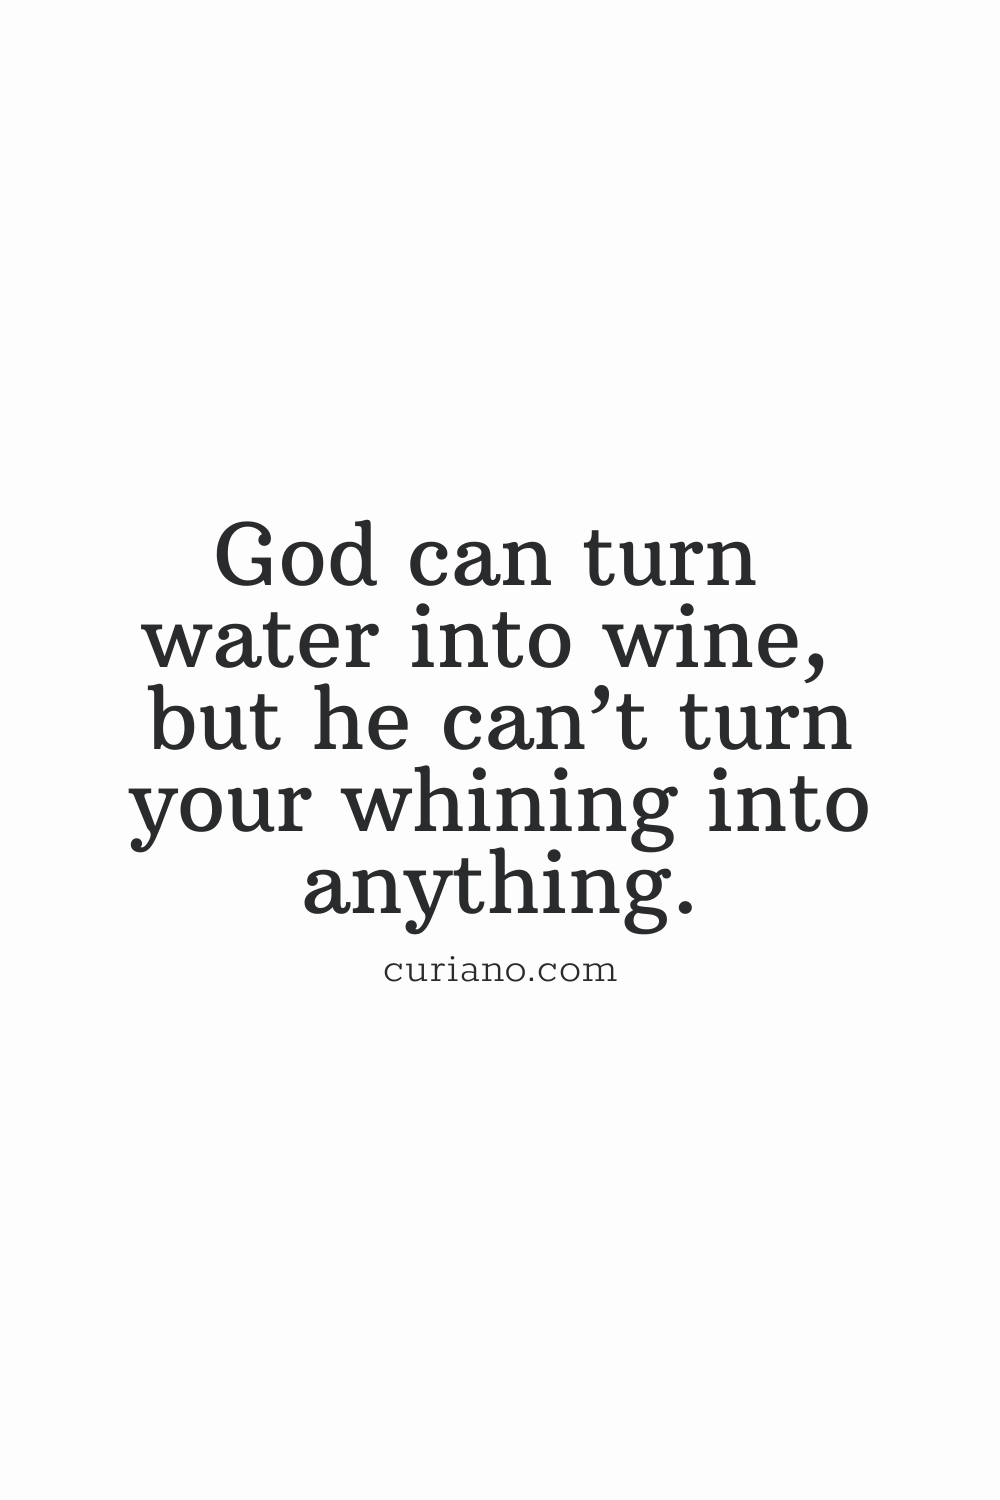 God can turn water into wine